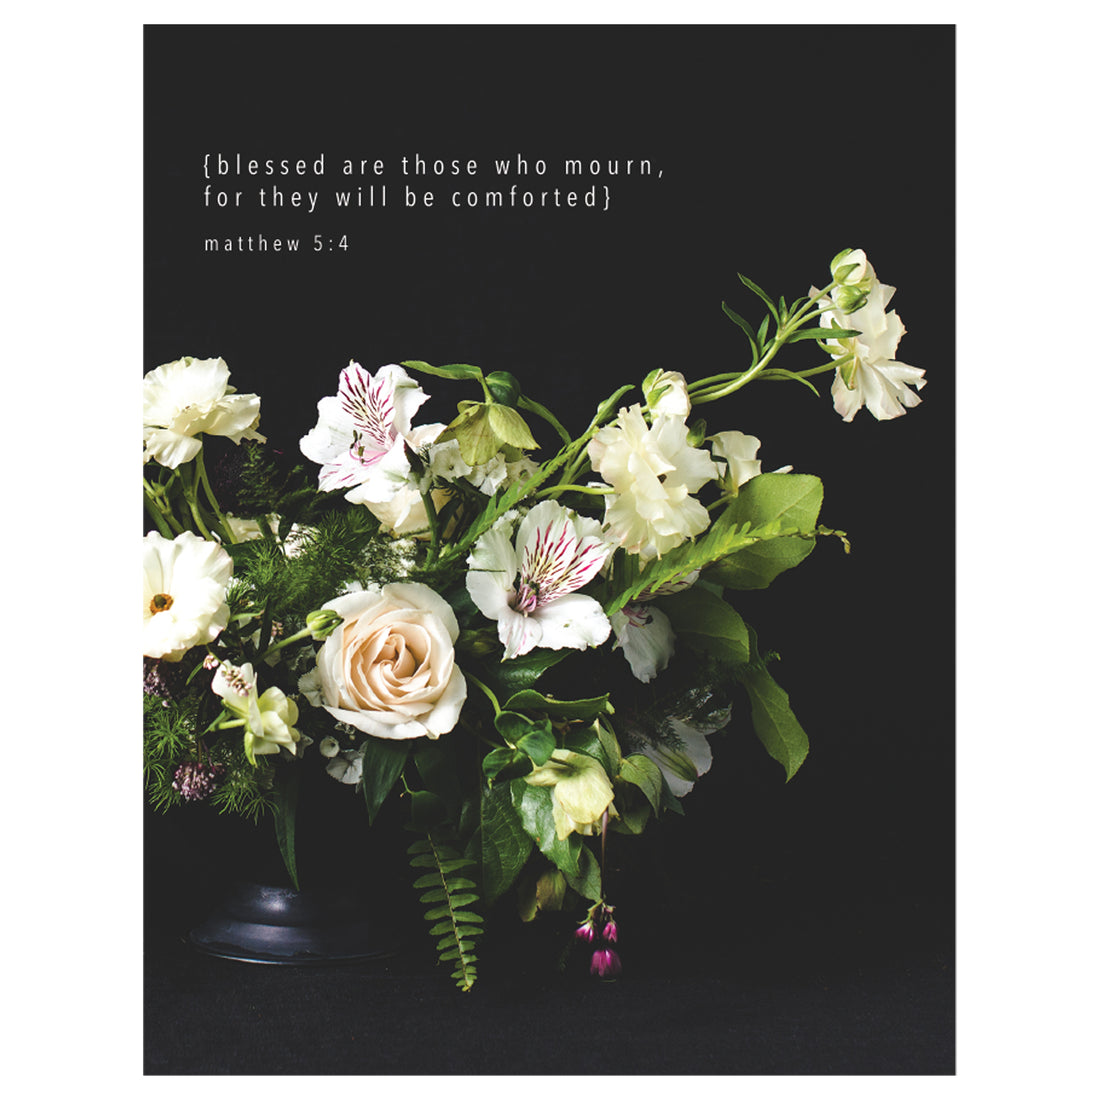 A stunning bouquet photography captured on a Floral Sympathy Card with the words blessed are those who mourn, by Hester &amp; Cook.